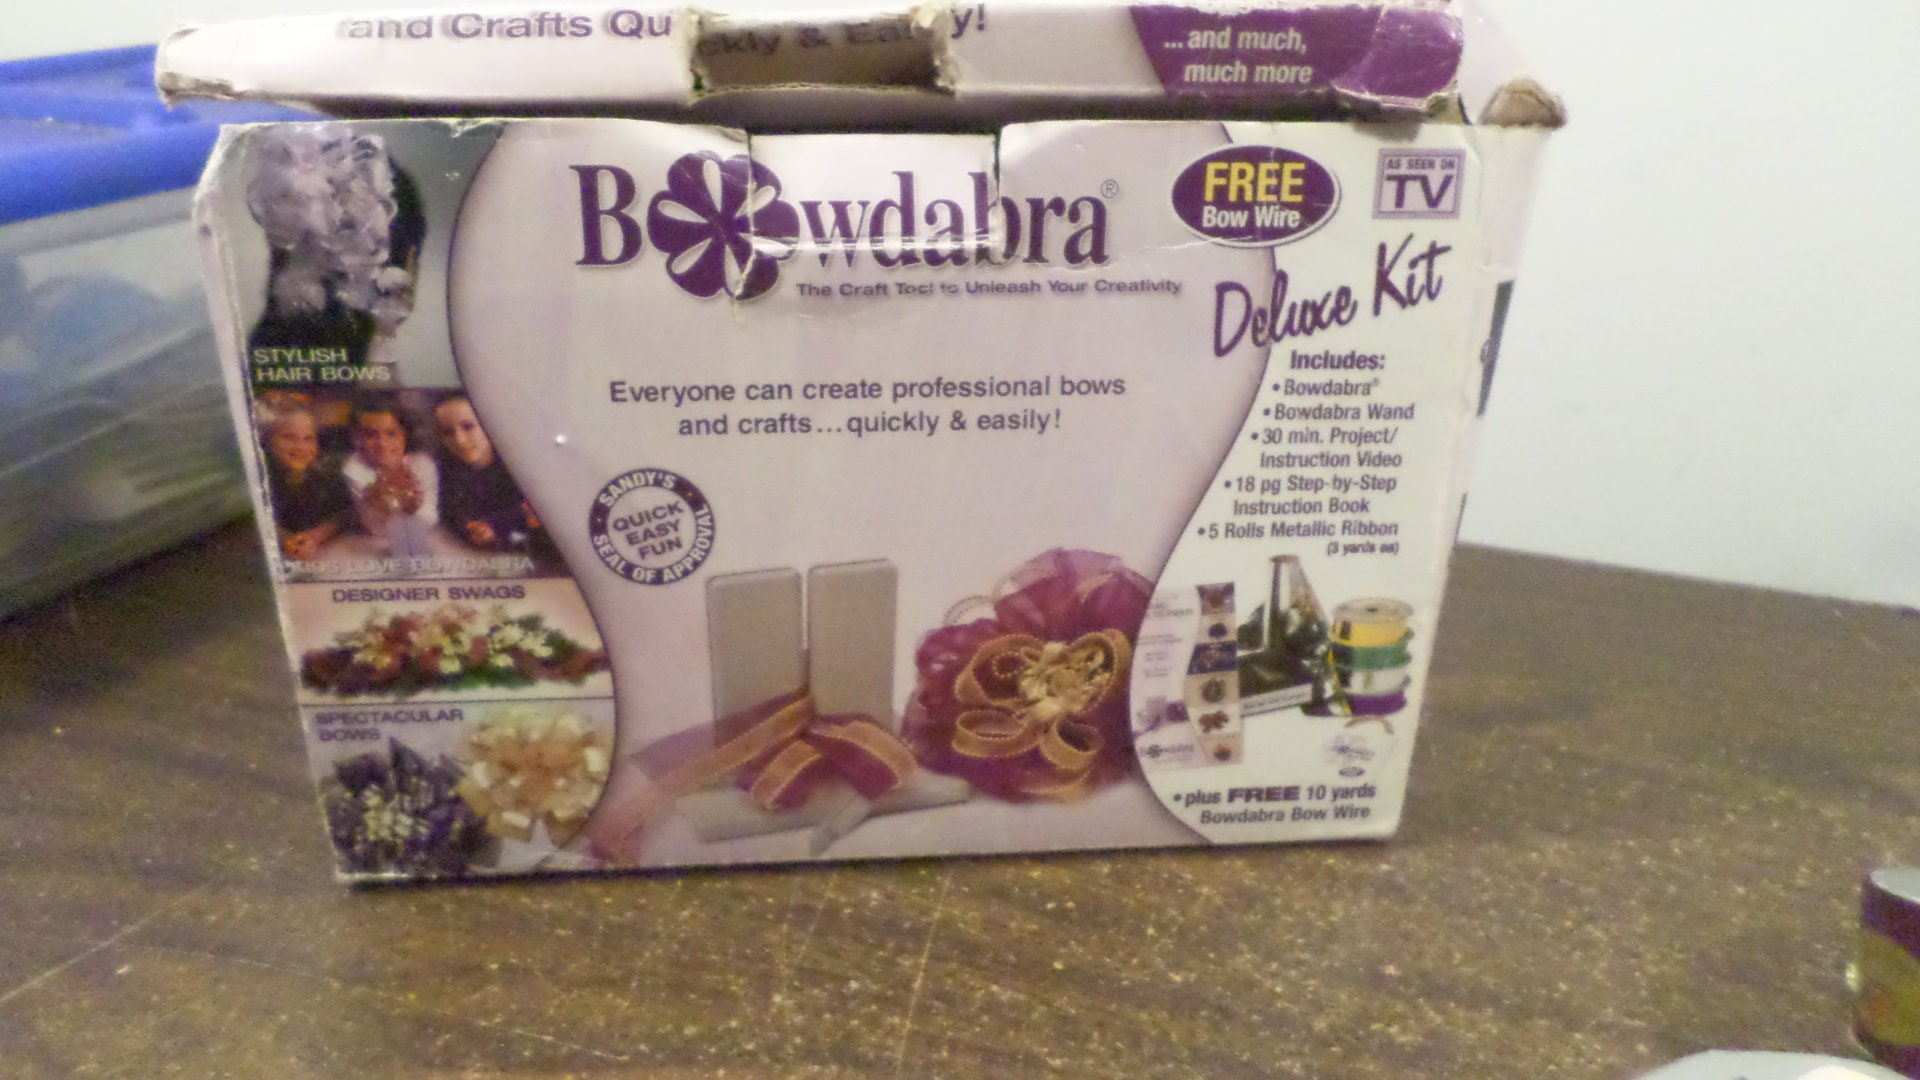 Bowdabra Craft Bow Maker and Craft Tool W/ Instructional DVD